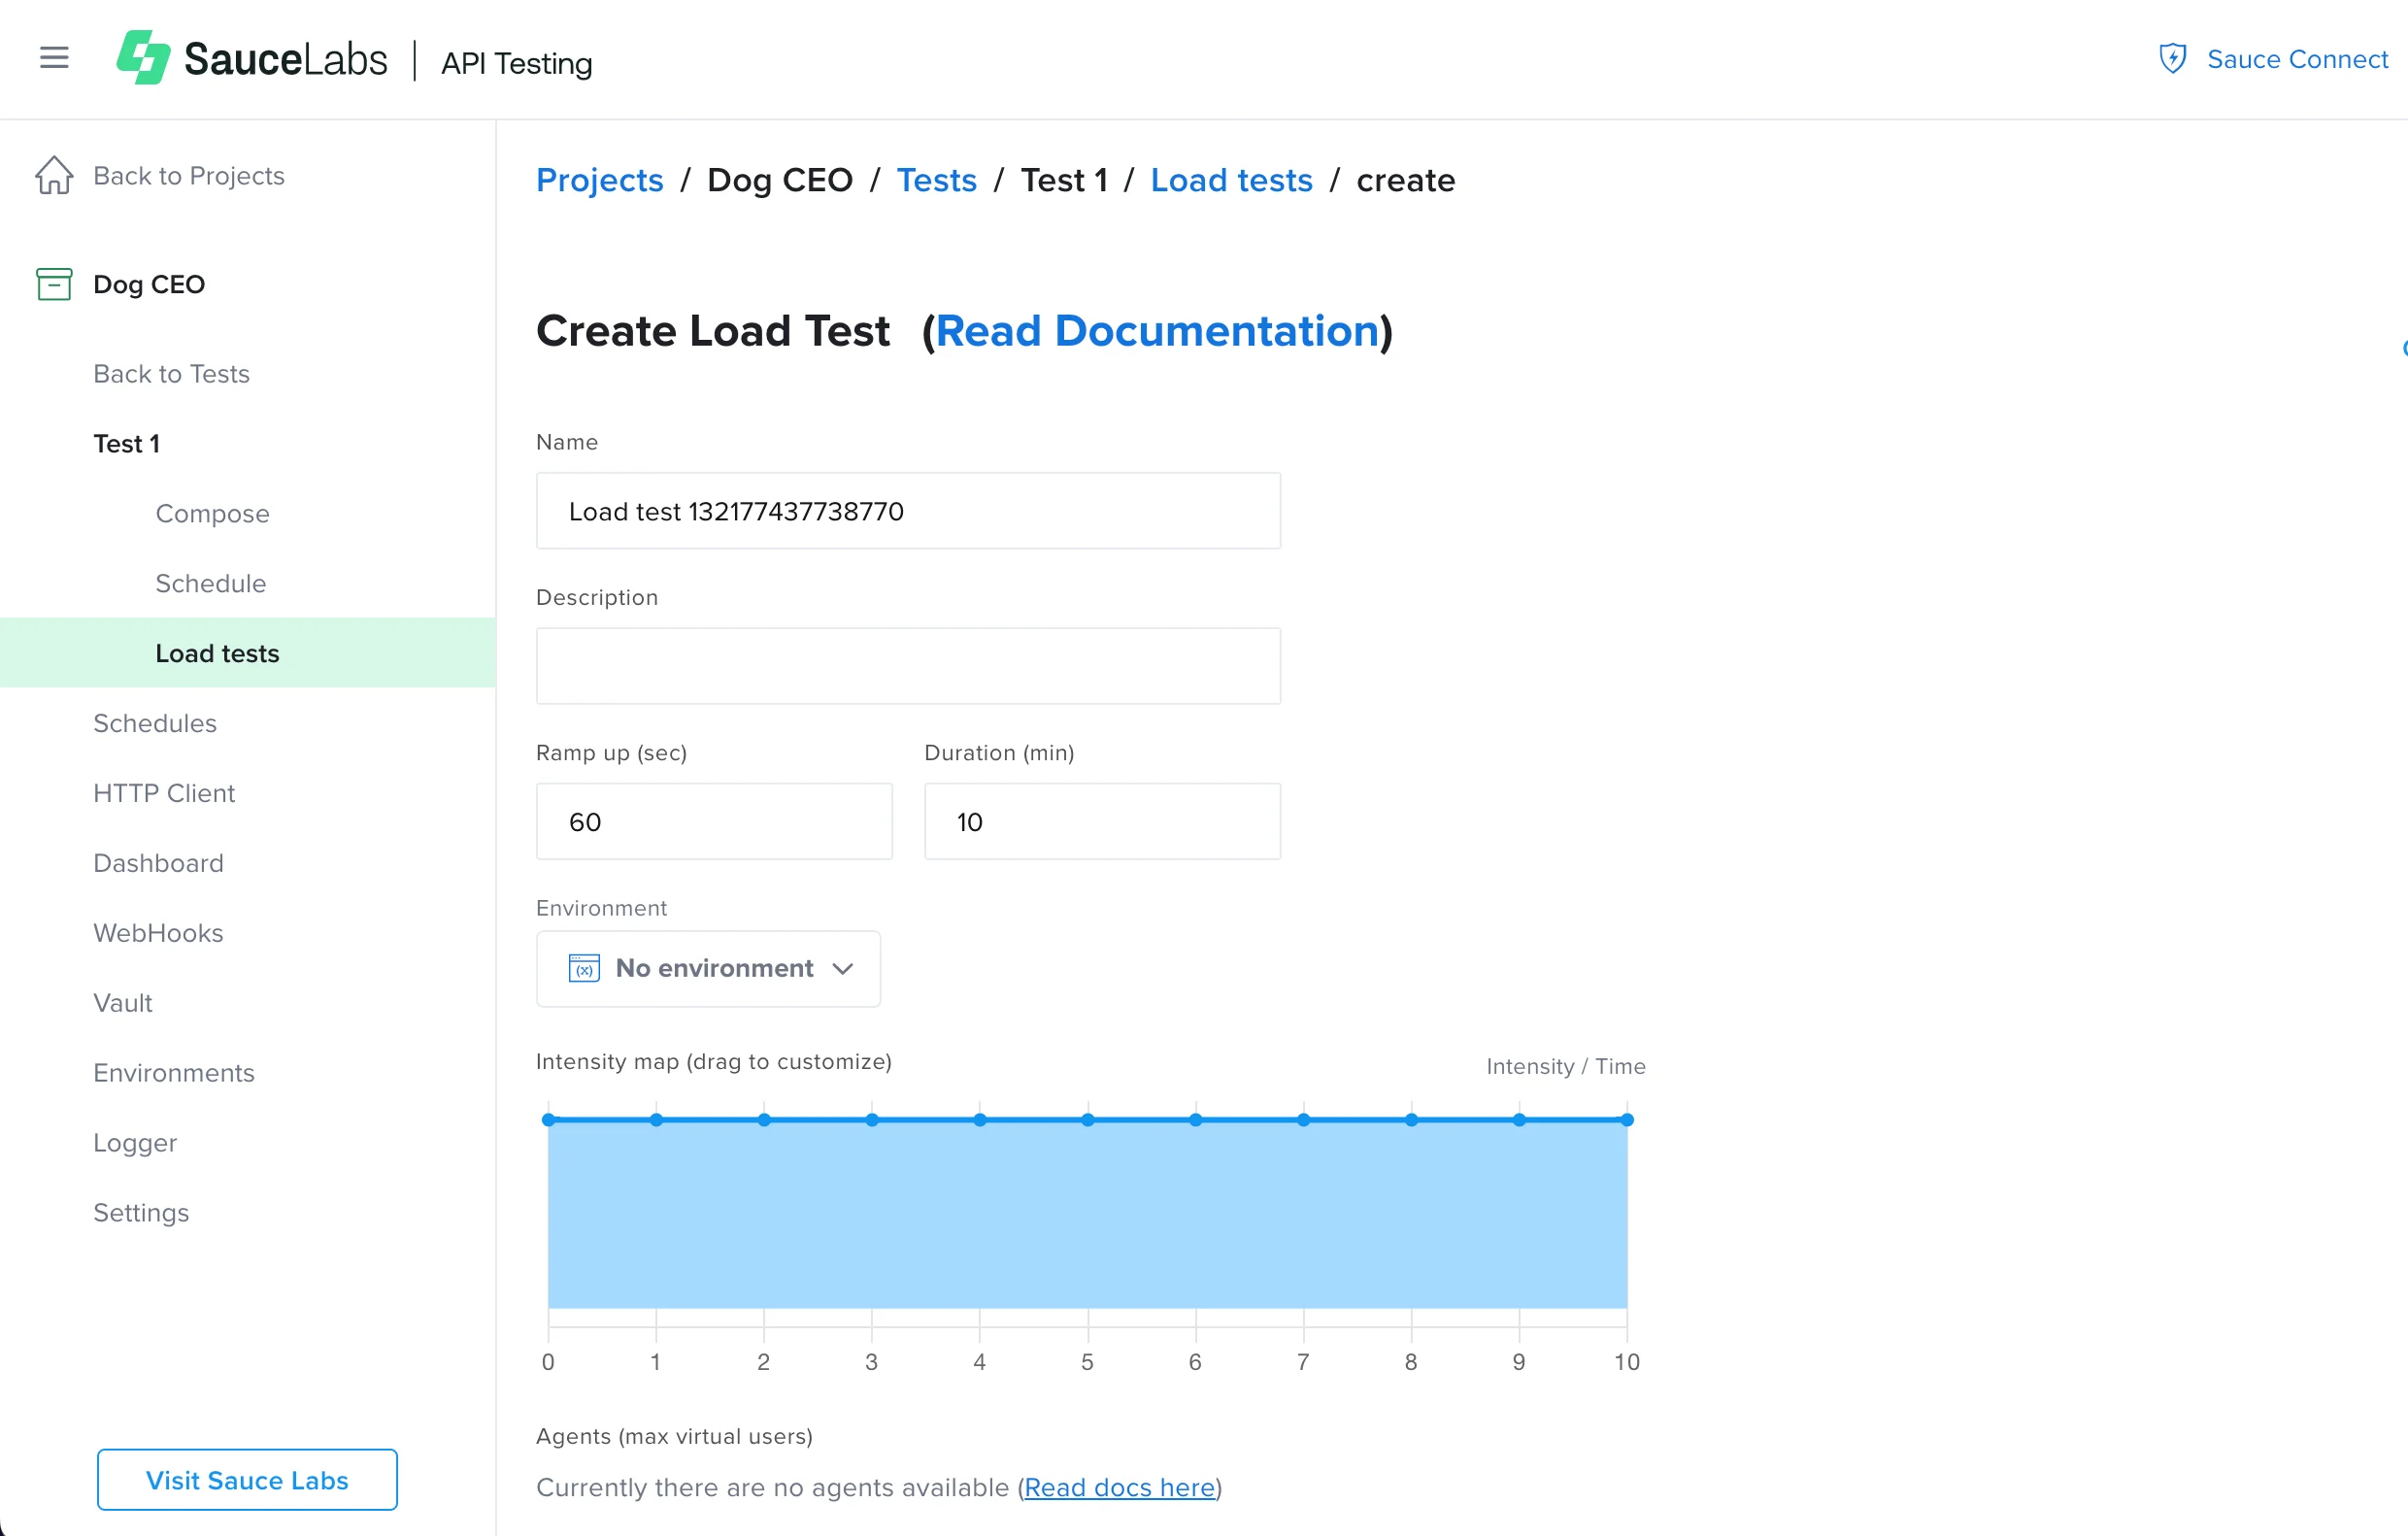 The Create Load test page